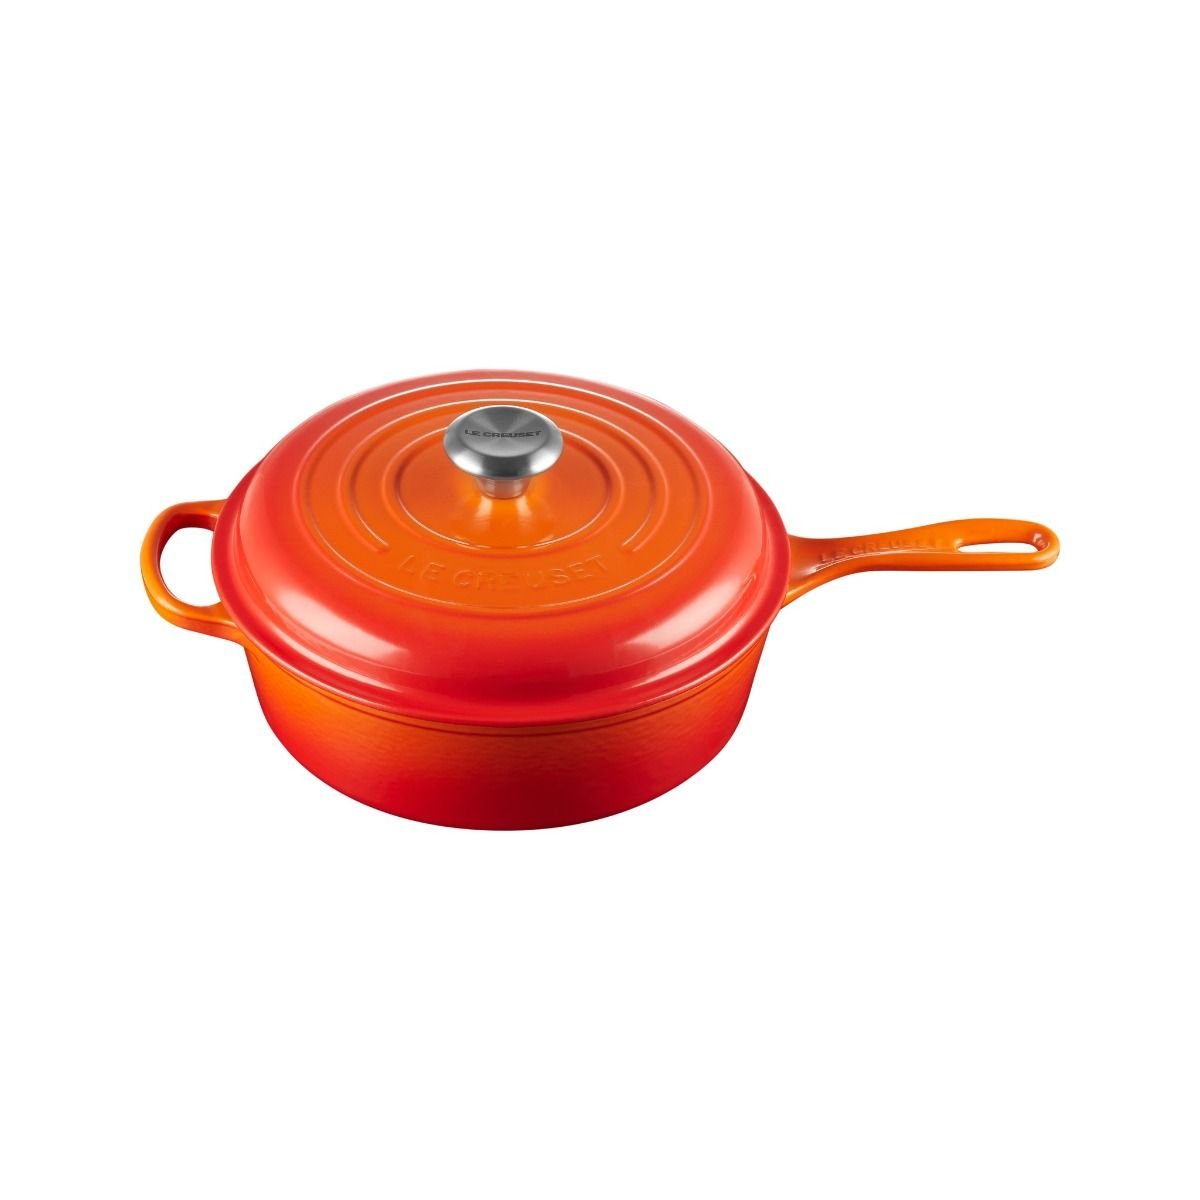 Le Creuset 5.5 Qt Round French Oven - The Peppermill